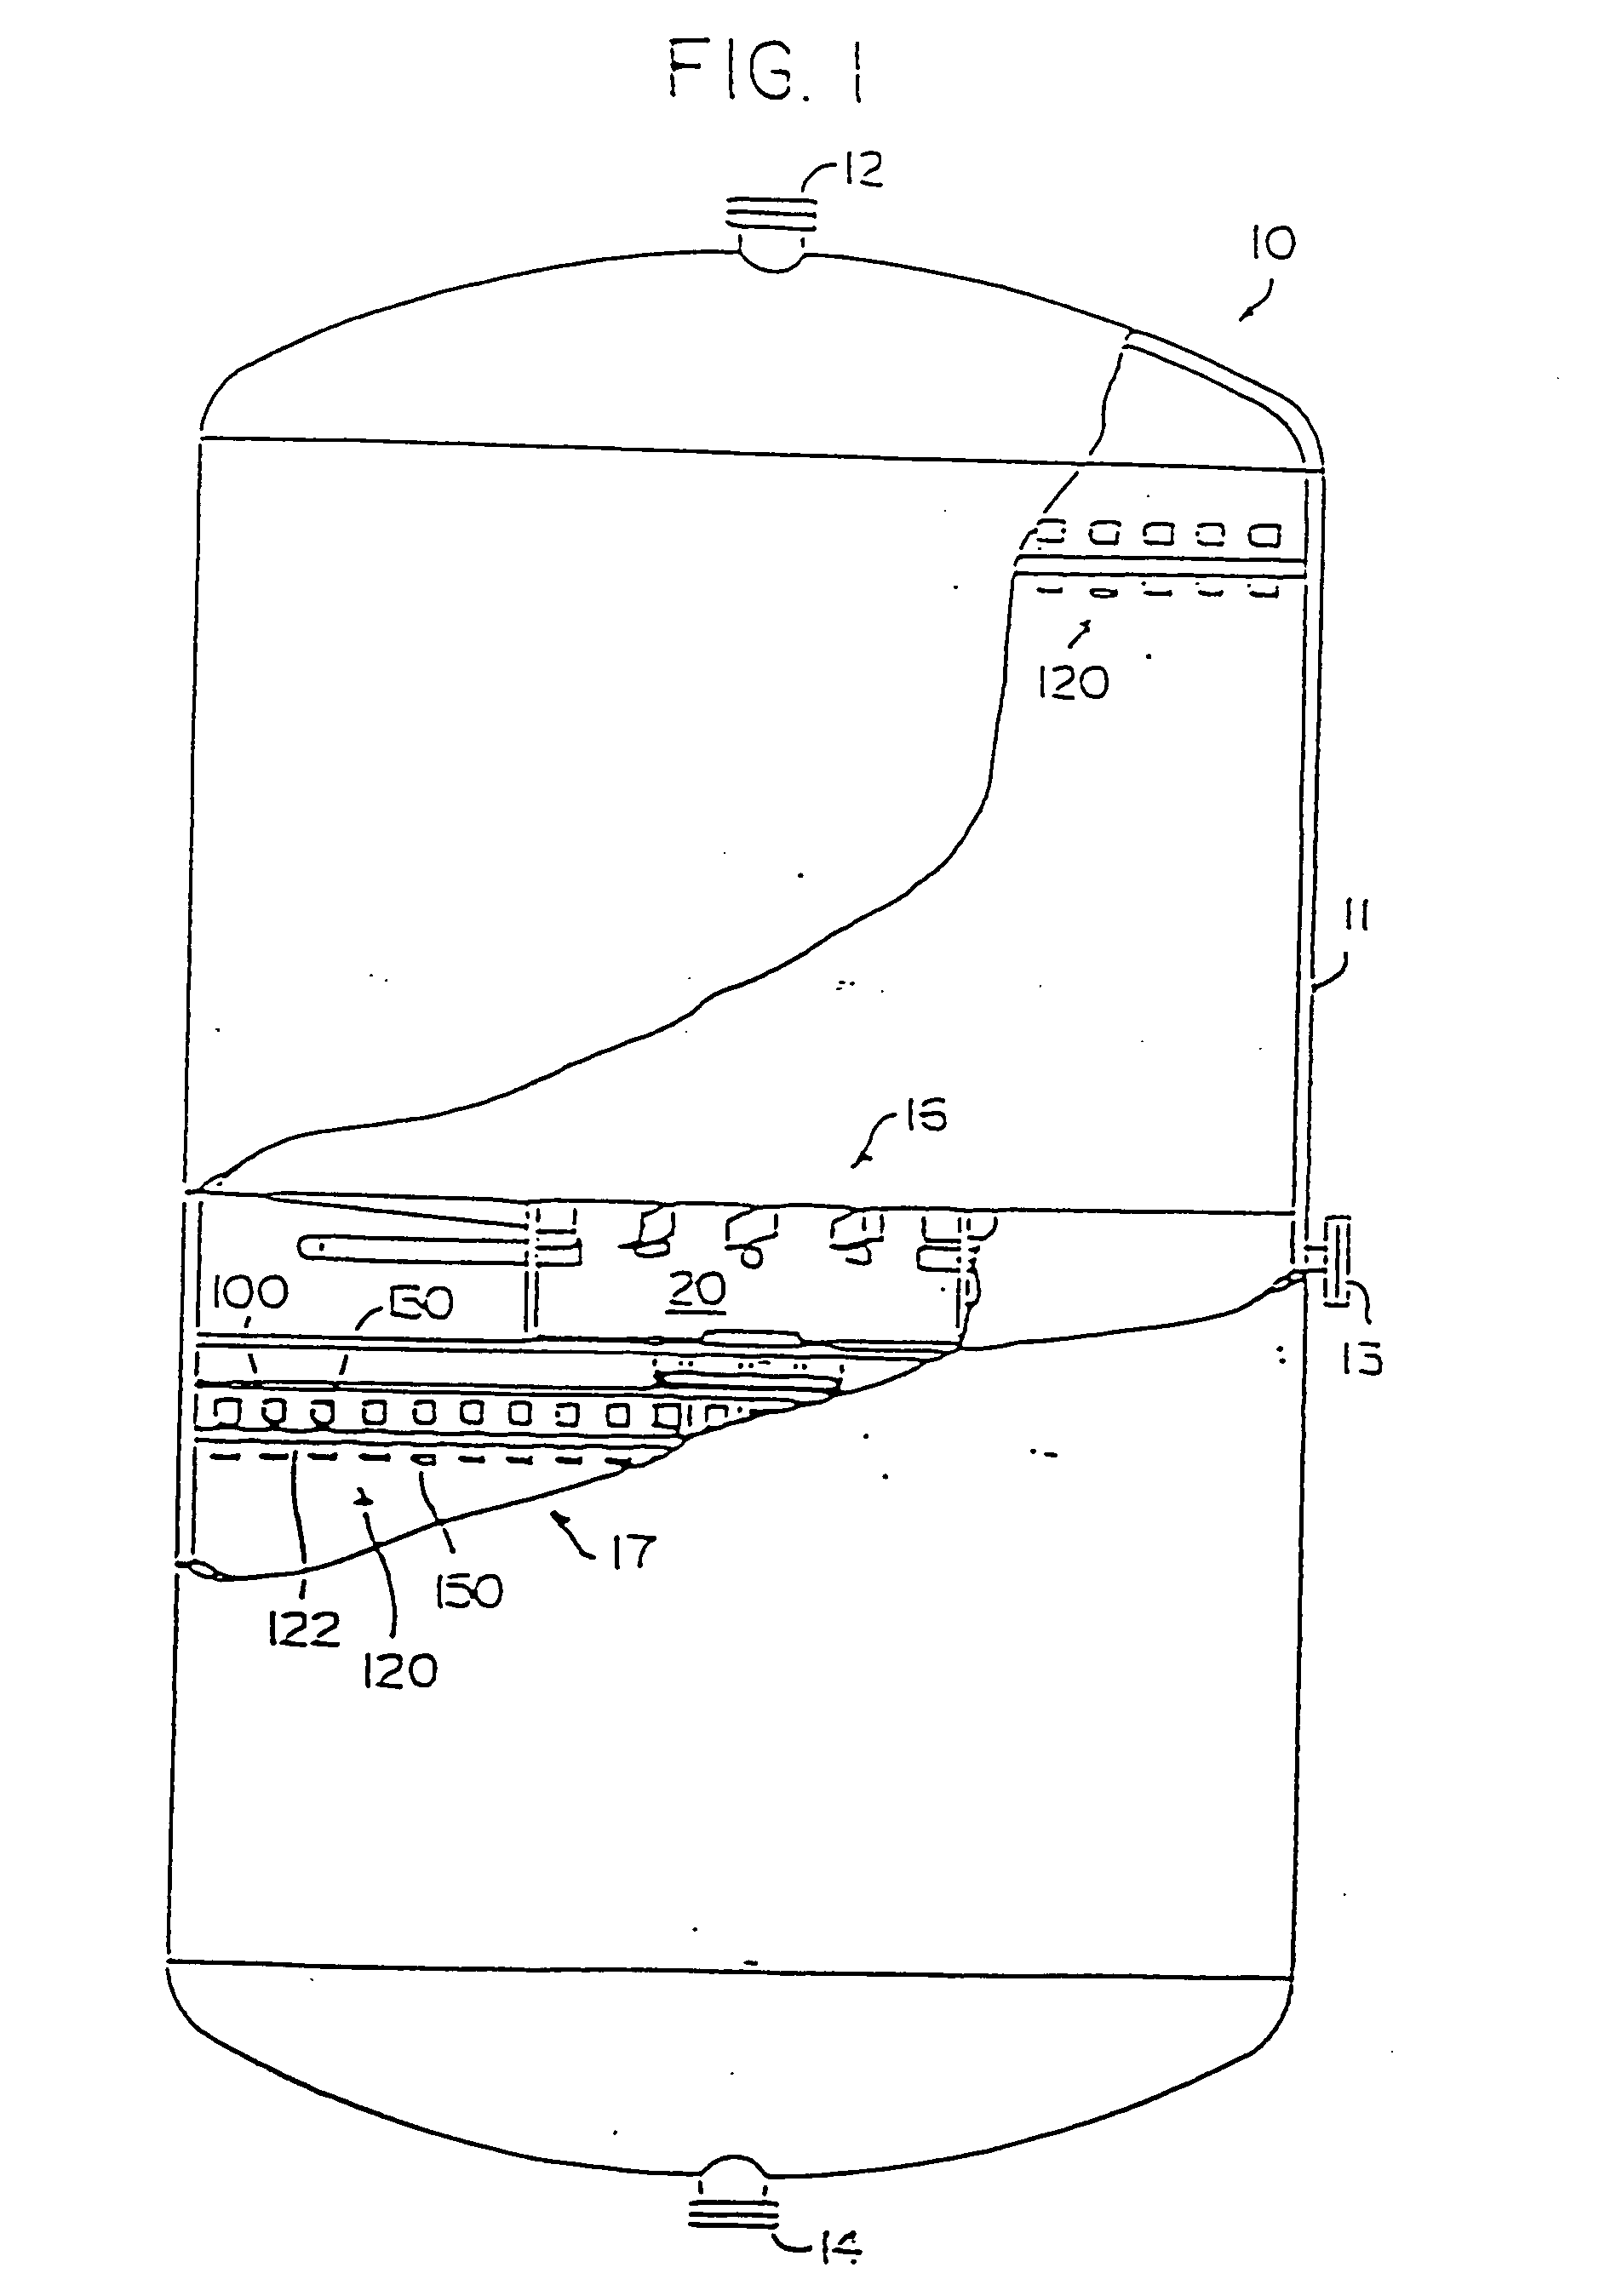 Reactordistribution apparatus and quench zone mixing apparatus